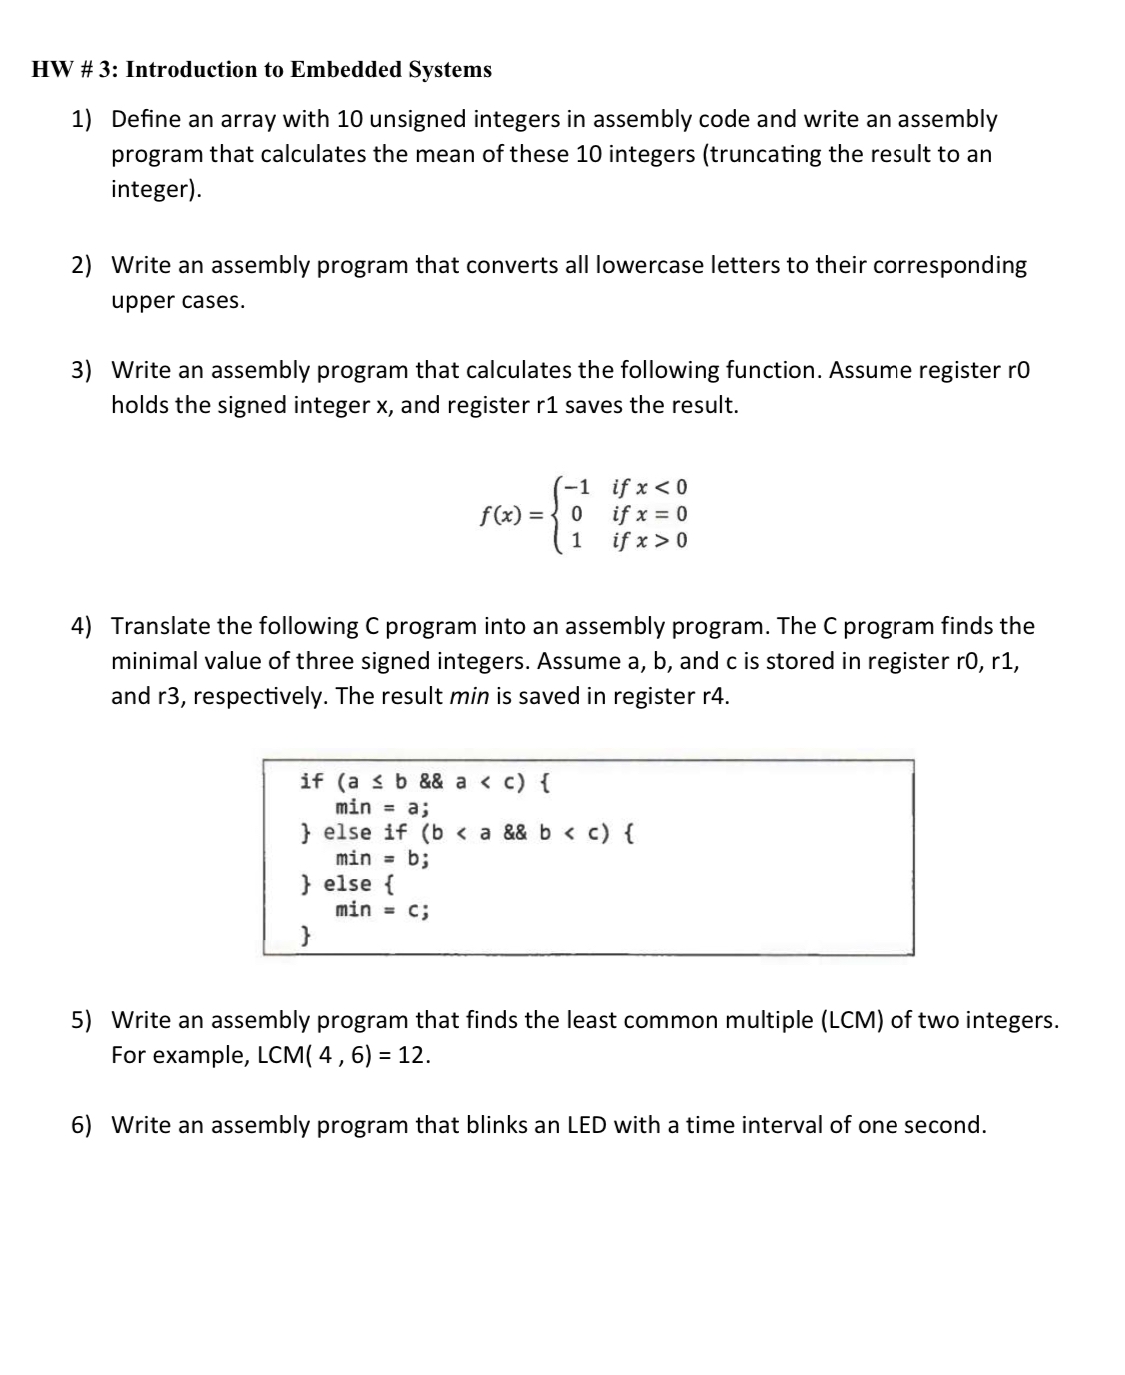 1) Define an array with 10 unsigned integers in assembly code and write an assembly program that calculates the mean of these 10 integers (truncating the result to an integer). 2) Write an assembly program that converts all lowercase letters to their corresponding upper cases. 3) Write an assembly program that calculates the following function. Assume register r0 holds the signed integer x, and register r1 saves the result. f(x)=10 if x0. 4) Translate the following C program into an assembly program. The C program finds the minimal value of three signed integers. Assume a, b, and c are stored in register r0, r1, and r3, respectively. The result min is saved in register r4. if (a<b && a<c) { min=a; } else if (b<a && b<c) { min=b; } else { min=c; } 5) Write an assembly program that finds the least common multiple (LCM) of two integers. For example, LCM(4,6)=12. 6) Write an assembly program that blinks an LED with a time interval of one second.